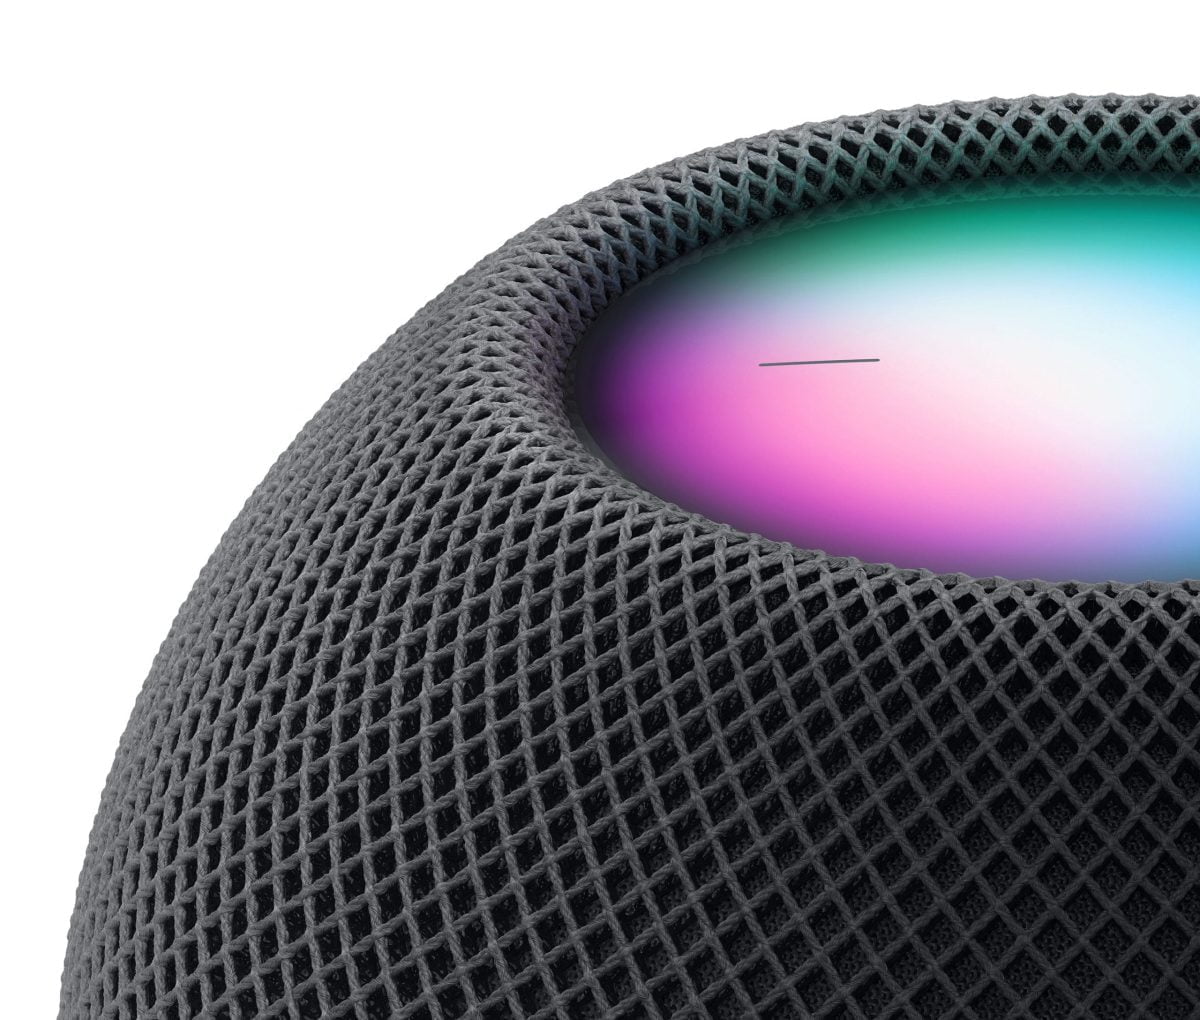 Homepod Mini Gallery 5 Scaled Apple &Lt;H1&Gt;Apple Homepod Mini Space Gray&Lt;/H1&Gt; Jam-Packed With Innovation, Homepod Mini Fills The Entire Room With Rich 360-Degree Audio. Place Multiple Speakers Around The House For A Connected Sound System.² And With Siri, Your Favorite Do-It-All Intelligent Assistant Helps With Everyday Tasks And Controls Your Smart Home Privately And Securely. &Lt;H2&Gt;Features:&Lt;/H2&Gt; - Fills The Entire Room With Rich 360-Degree Audio - Siri Is Your Do-It-All Intelligent Assistant, Helping With Everyday Tasks - Easily Control Your Smart Home - Designed To Keep Your Data Private And Secure - Place Multiple Homepod Mini Speakers Around The House For A Connected Sound System² - Intercom Messages To Every Room³ - Pair Two Homepod Mini Speakers Together For Immersive Stereo Sound - Voice Recognition Gives Each Family Member A Personalized Experience⁴ - Seamlessly Hand-Off Audio By Bringing Your Iphone Close To Homepod Setup Requires Wi-Fi And Iphone, Ipad, Or Ipod Touch With The Latest Software. &Lt;Pre&Gt;Apple Warranty&Lt;/Pre&Gt; Homepod Mini Apple Homepod Mini Space Gray